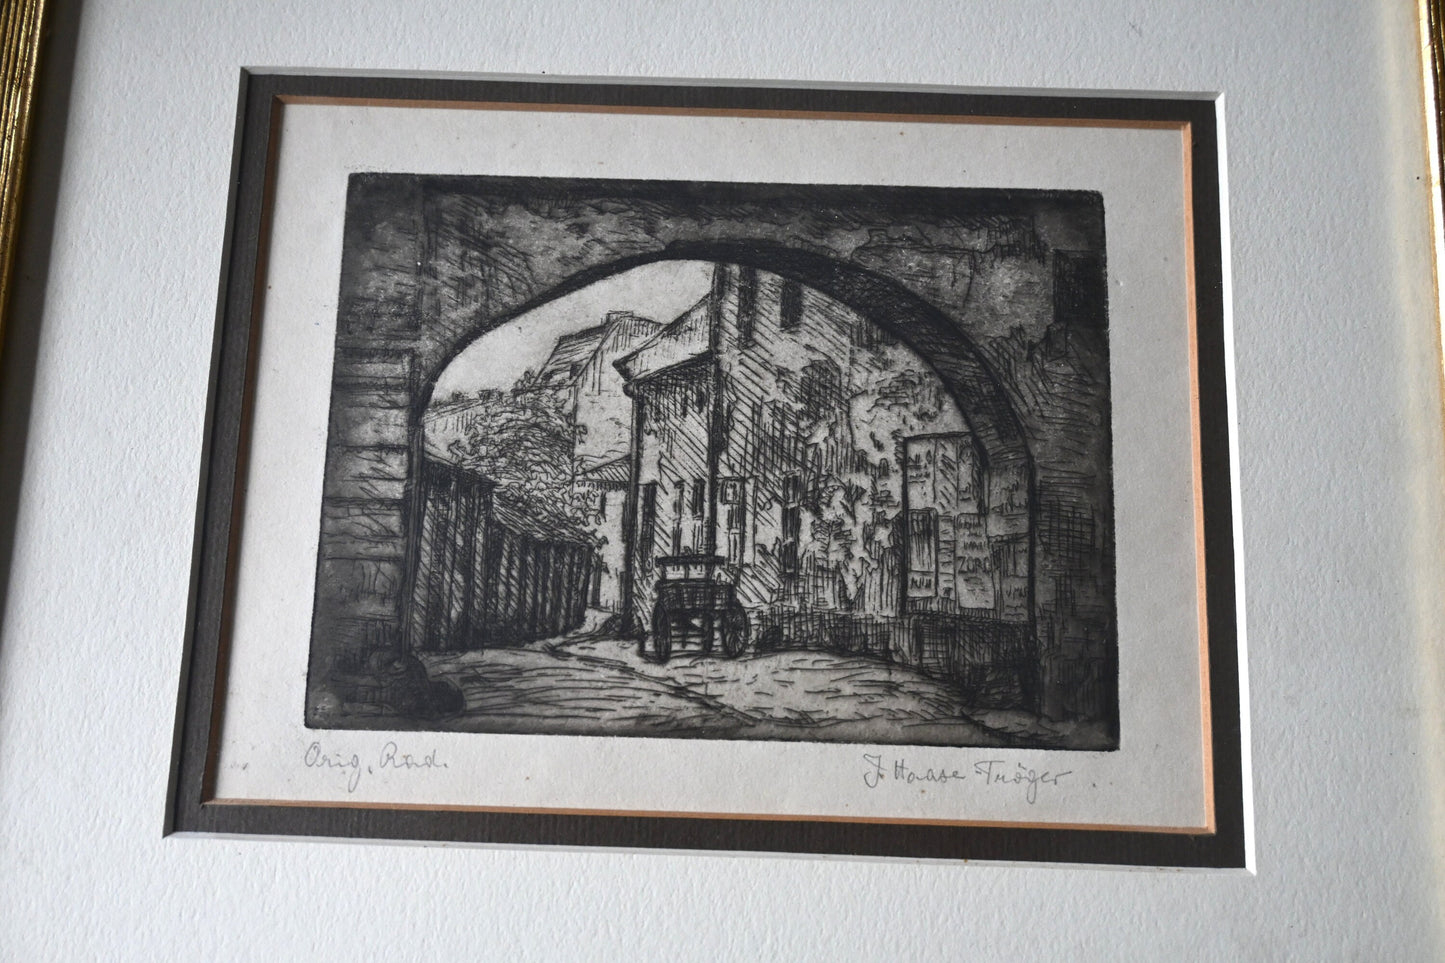 Janina Haase-Troger (b. 1886) Austrian etching, framed, signed lower right in pencil plate size: H 4 1/8" W 5 3/4"